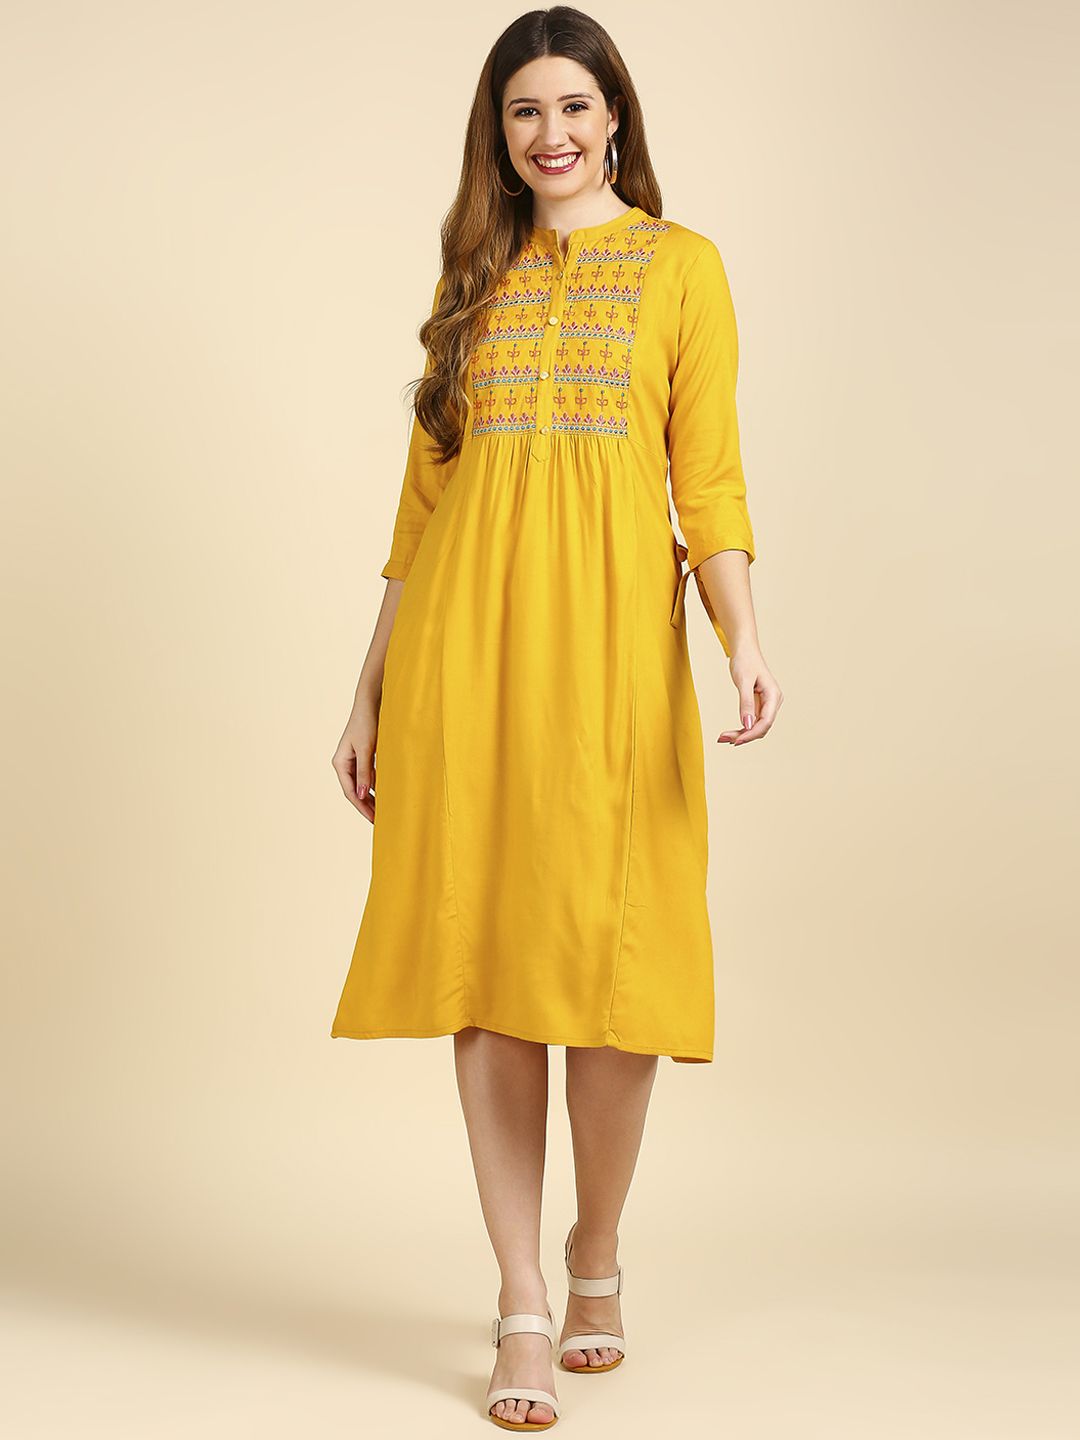 Anubhutee Mustard Yellow Ethnic Motifs Embroidered Ethnic A-Line Midi Dress Price in India